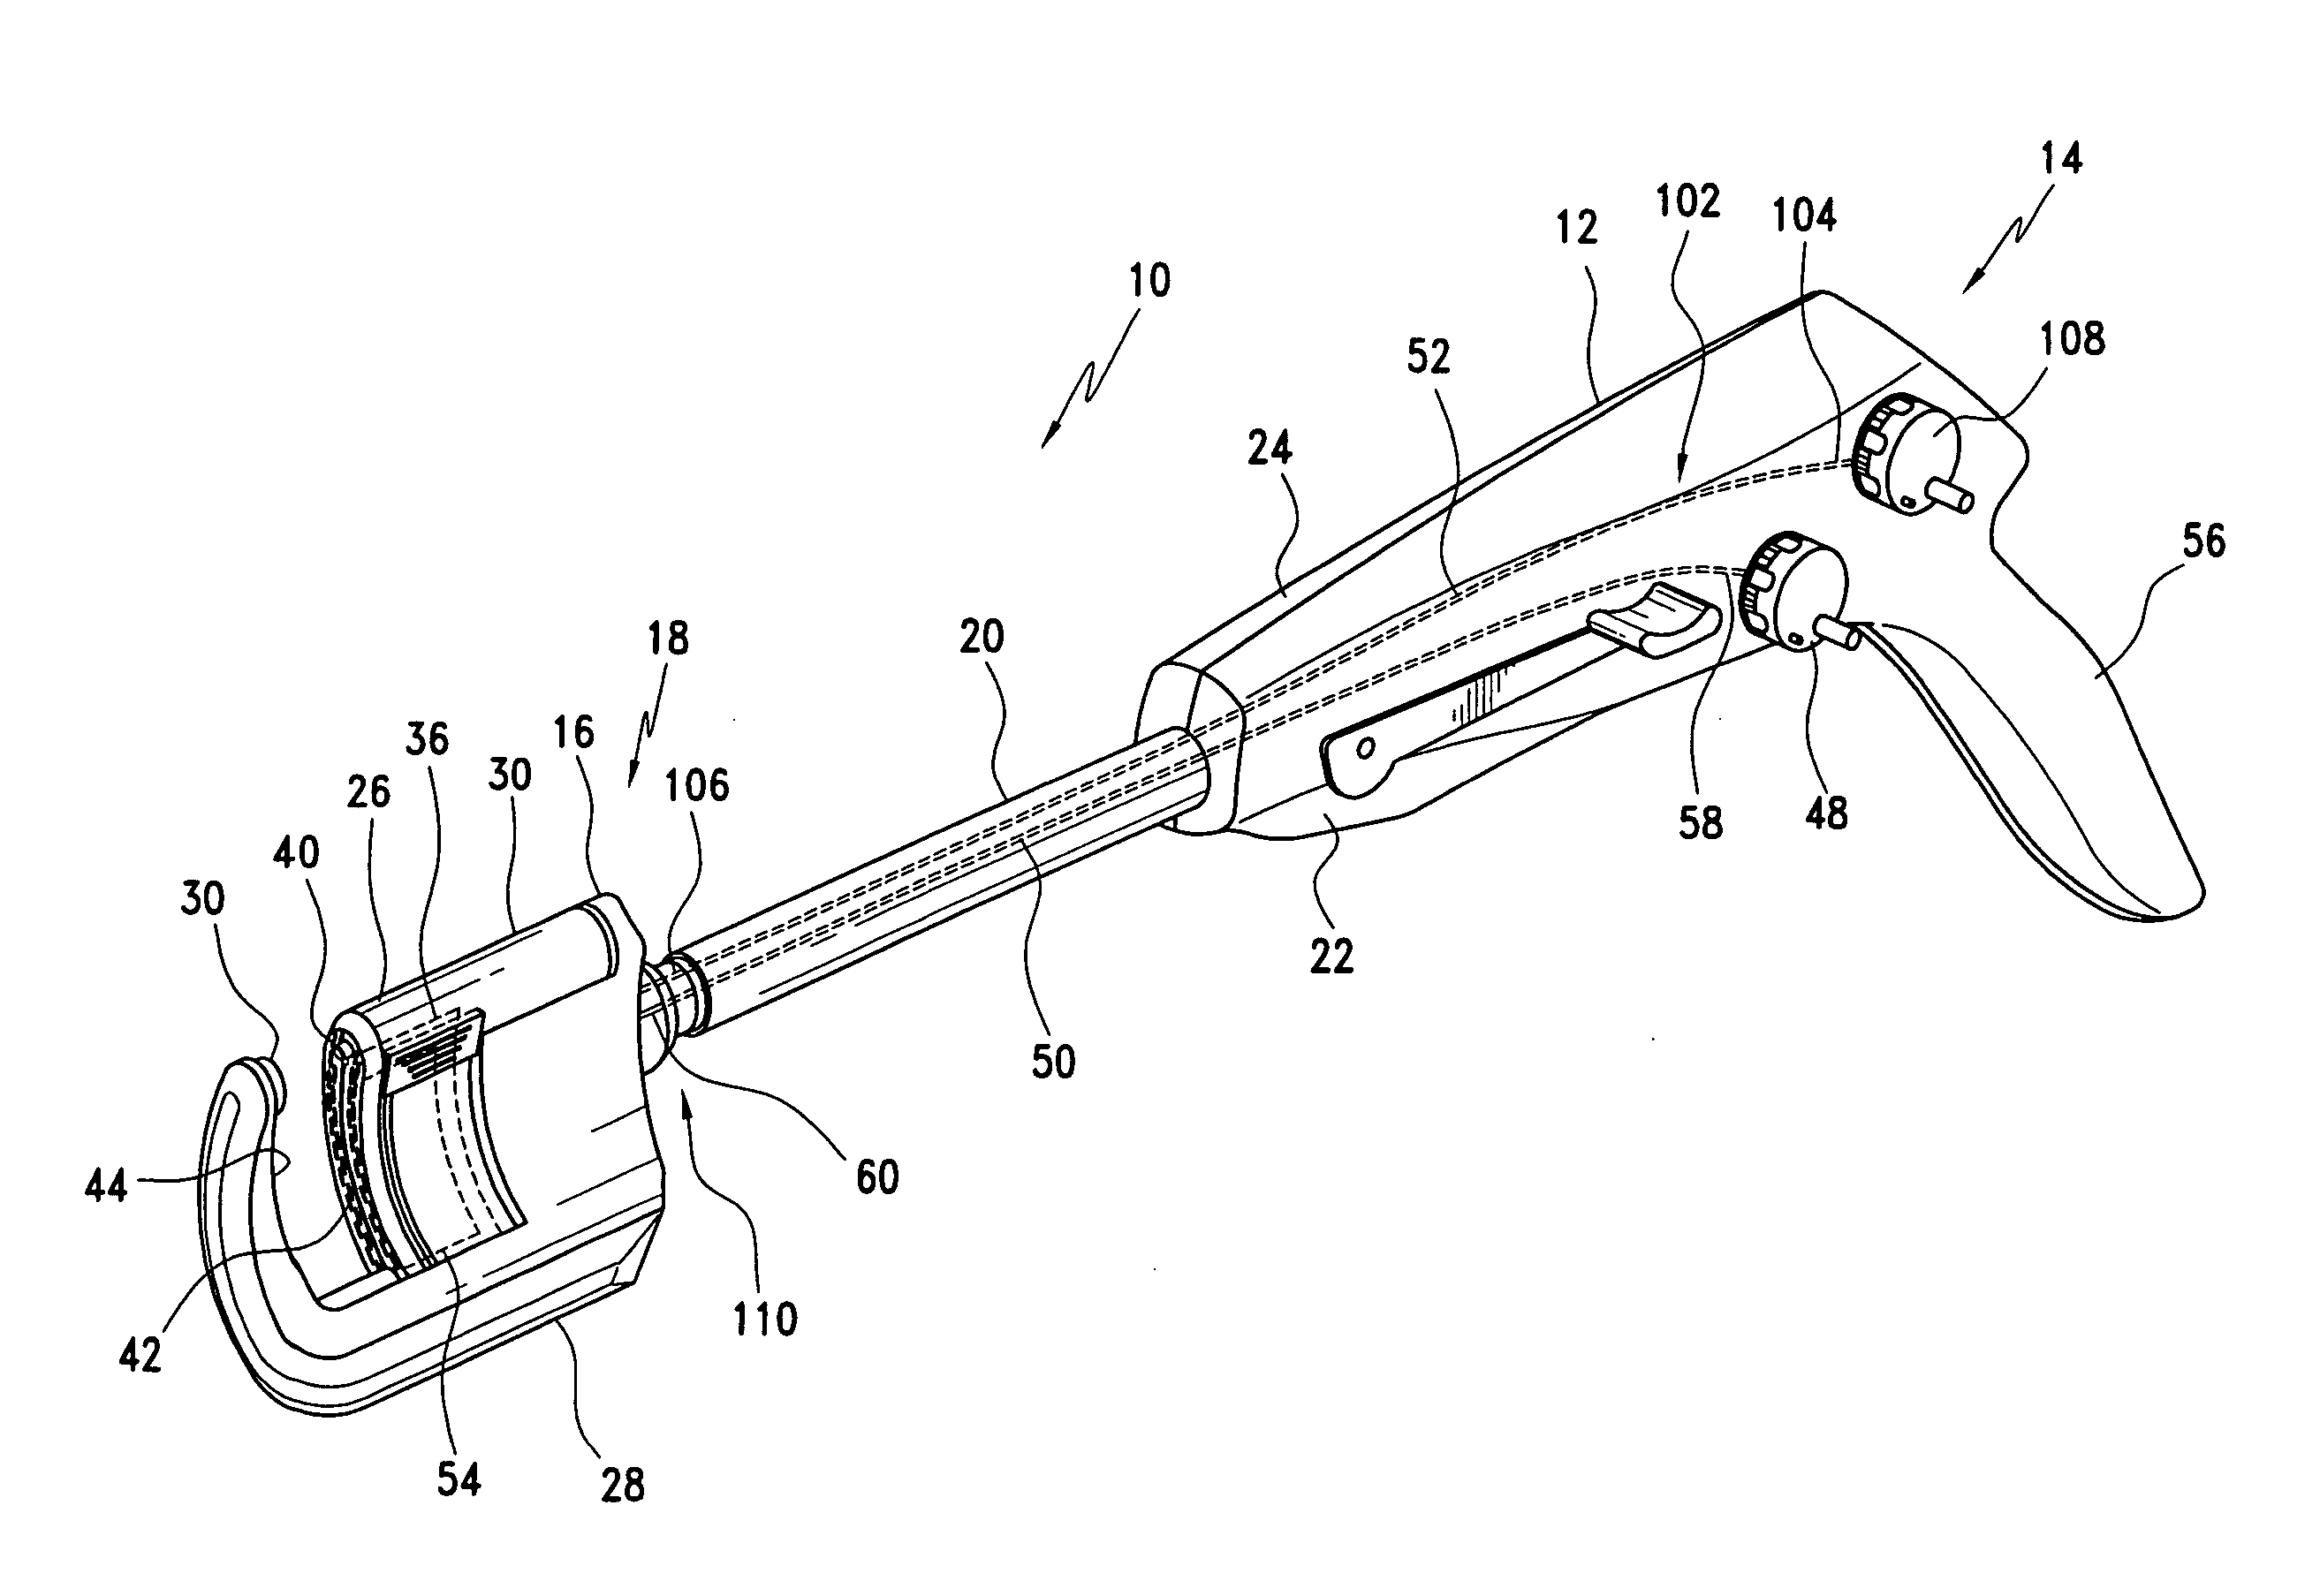 Rotating curved cutter stapler